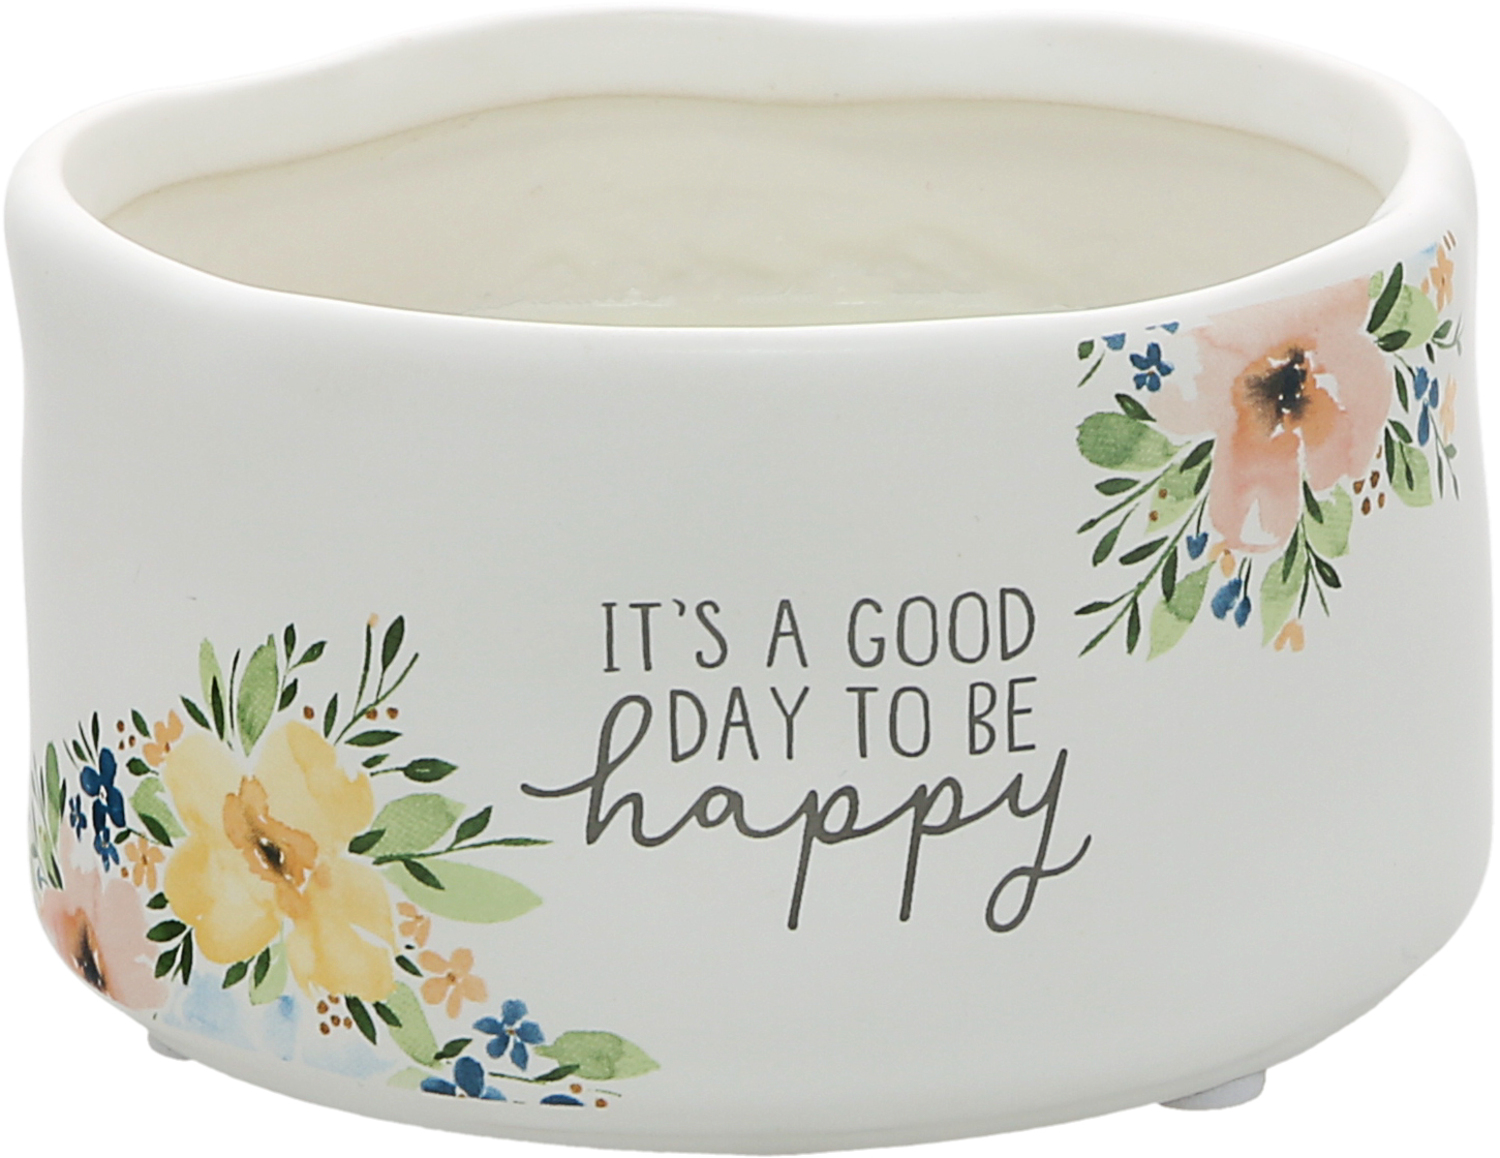 Happy by Graceful Love -BCB - Happy - 8 oz - 100% Soy Wax Reveal Candle
Scent: Tranquility